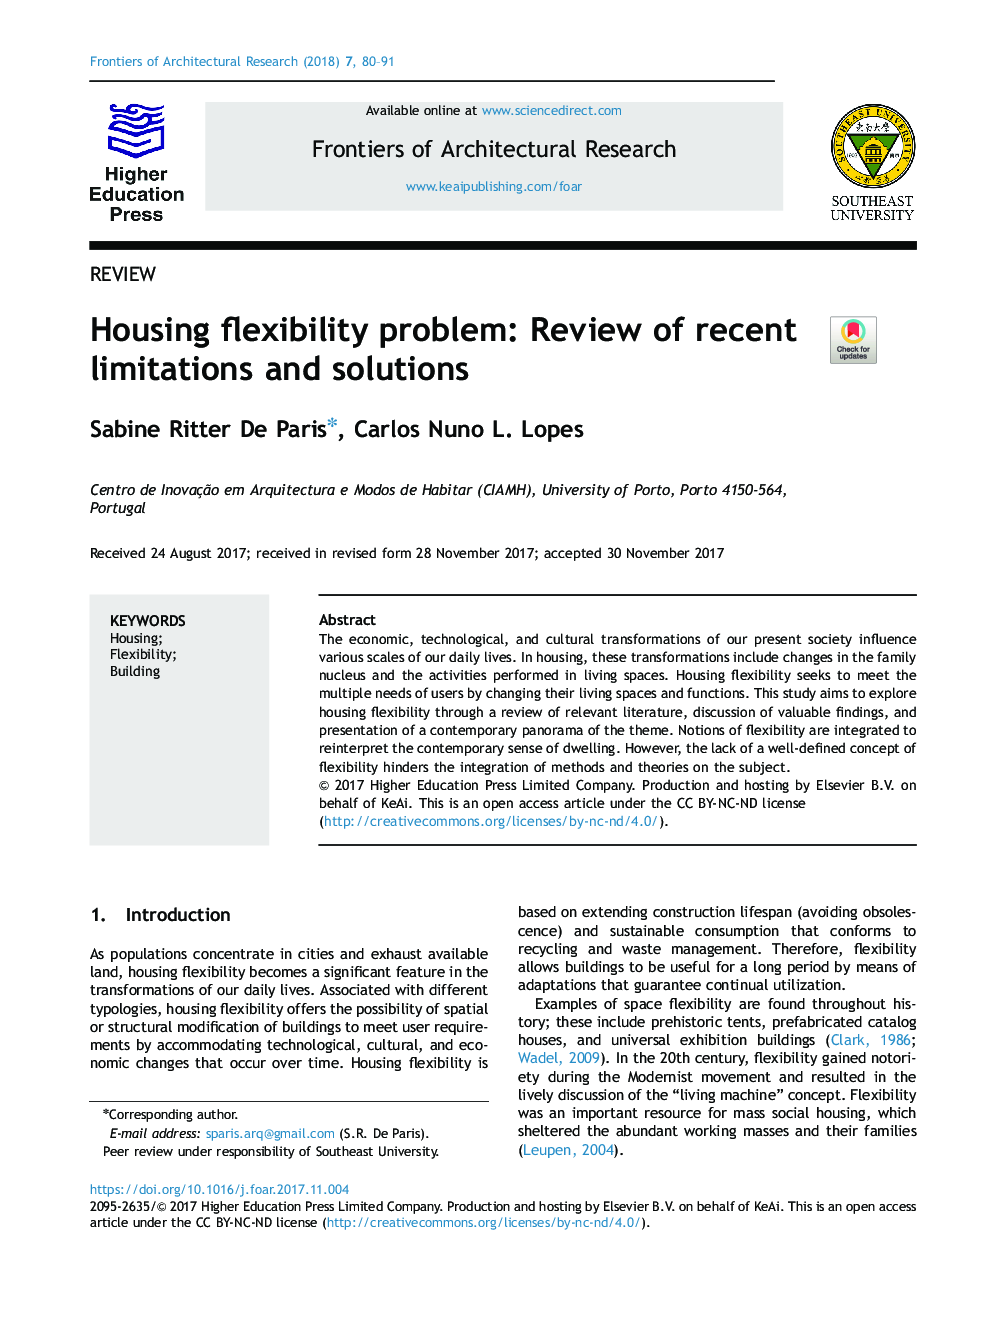 Housing flexibility problem: Review of recent limitations and solutions